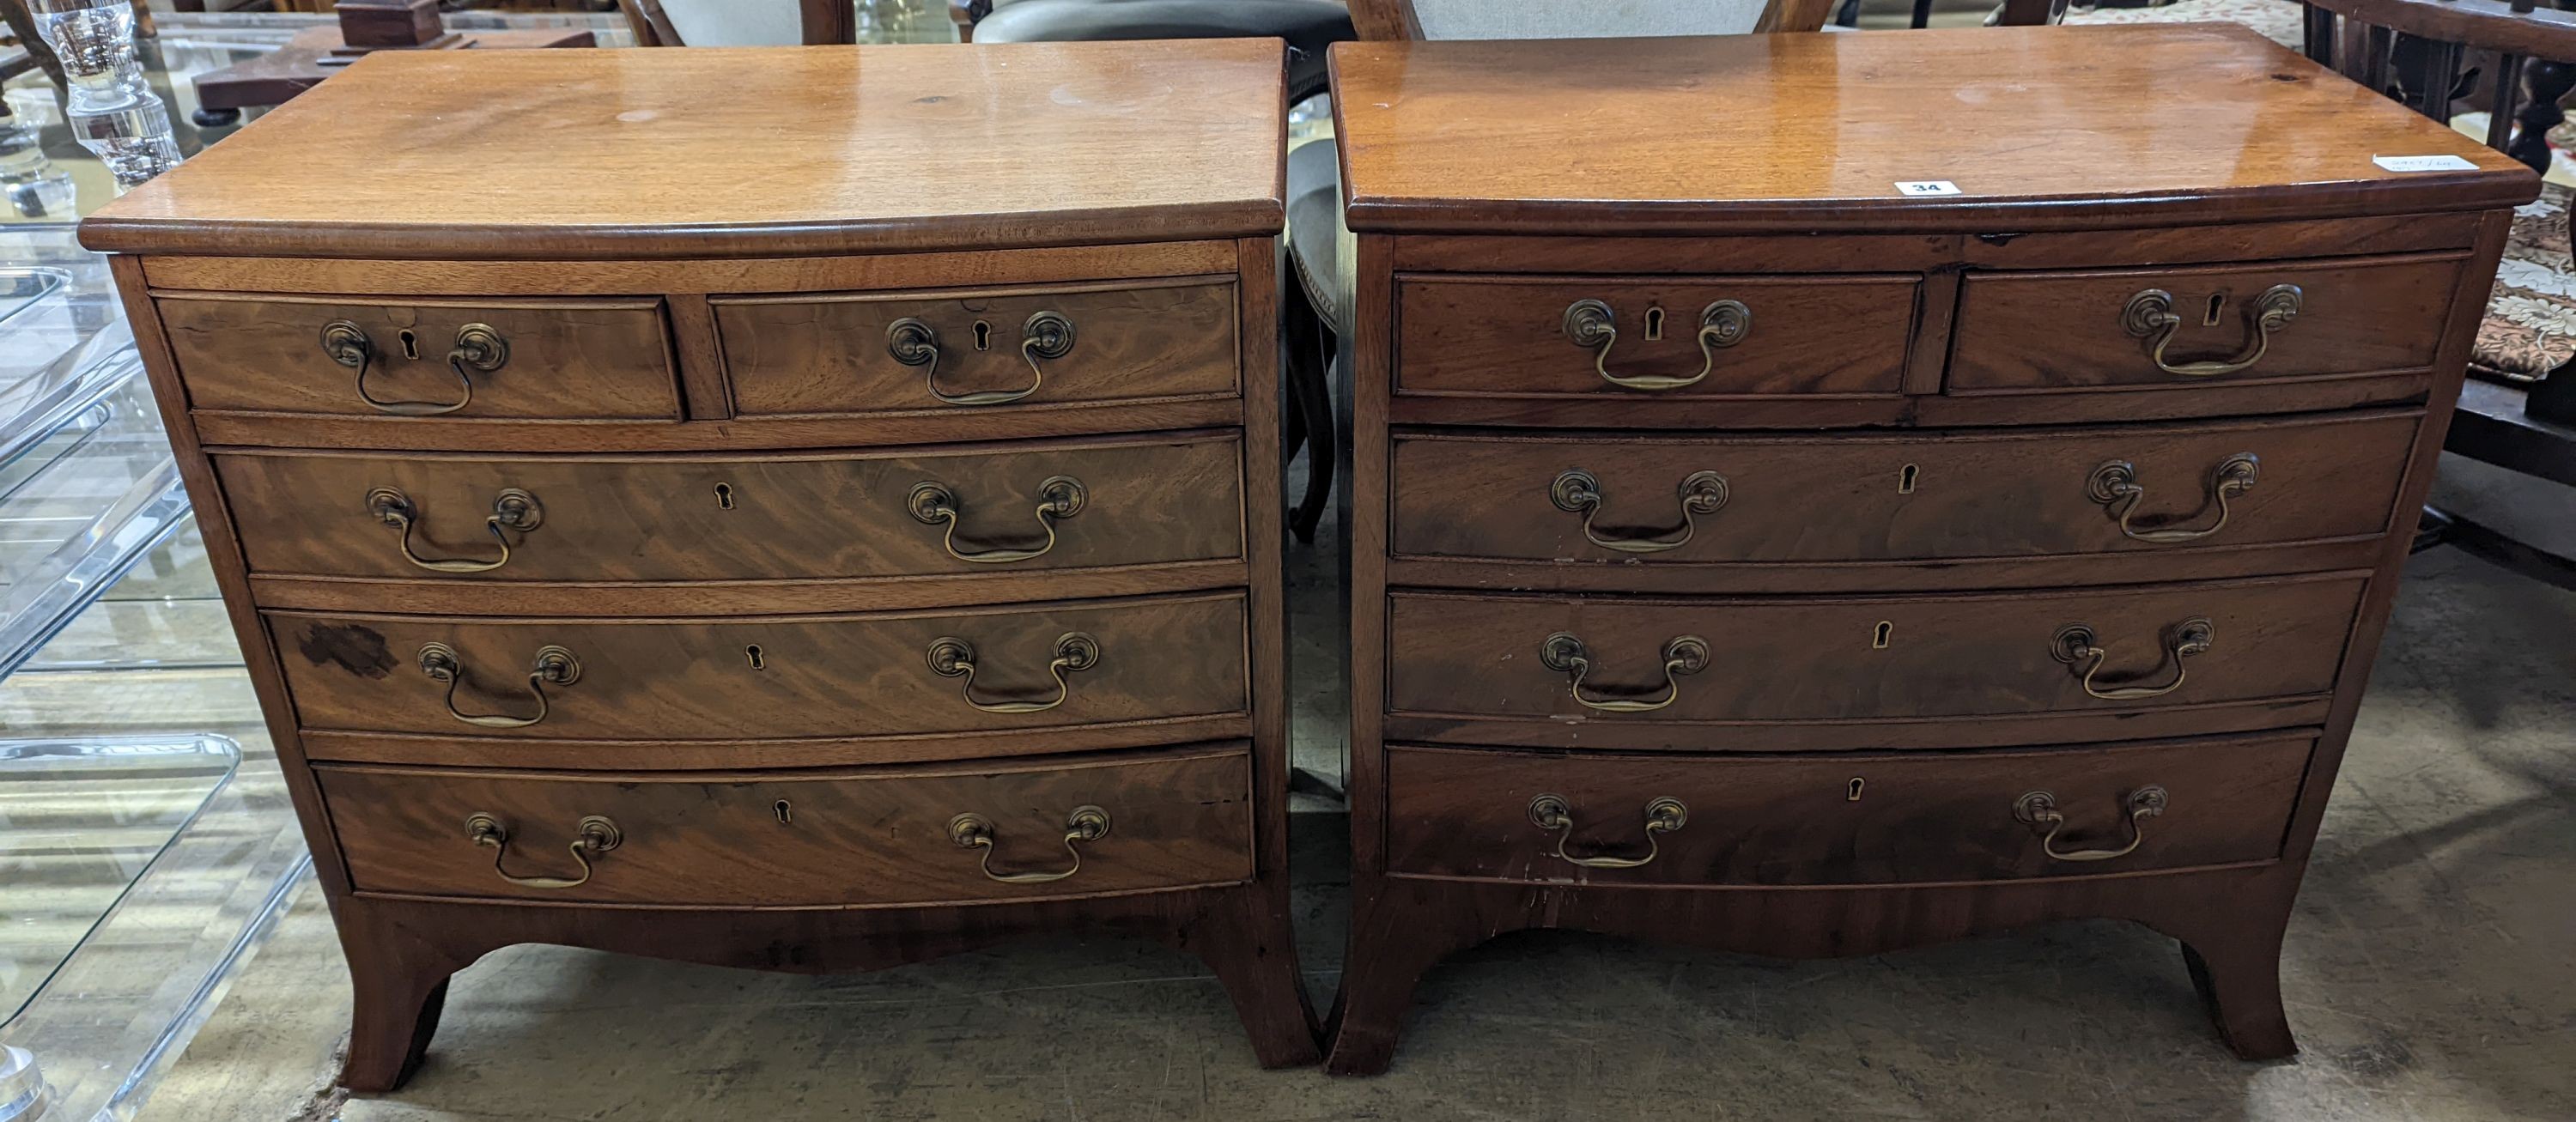 A pair of reproduction George III style bow fronted mahogany bedside chests, width 66cm, depth 39cm, height 64cm